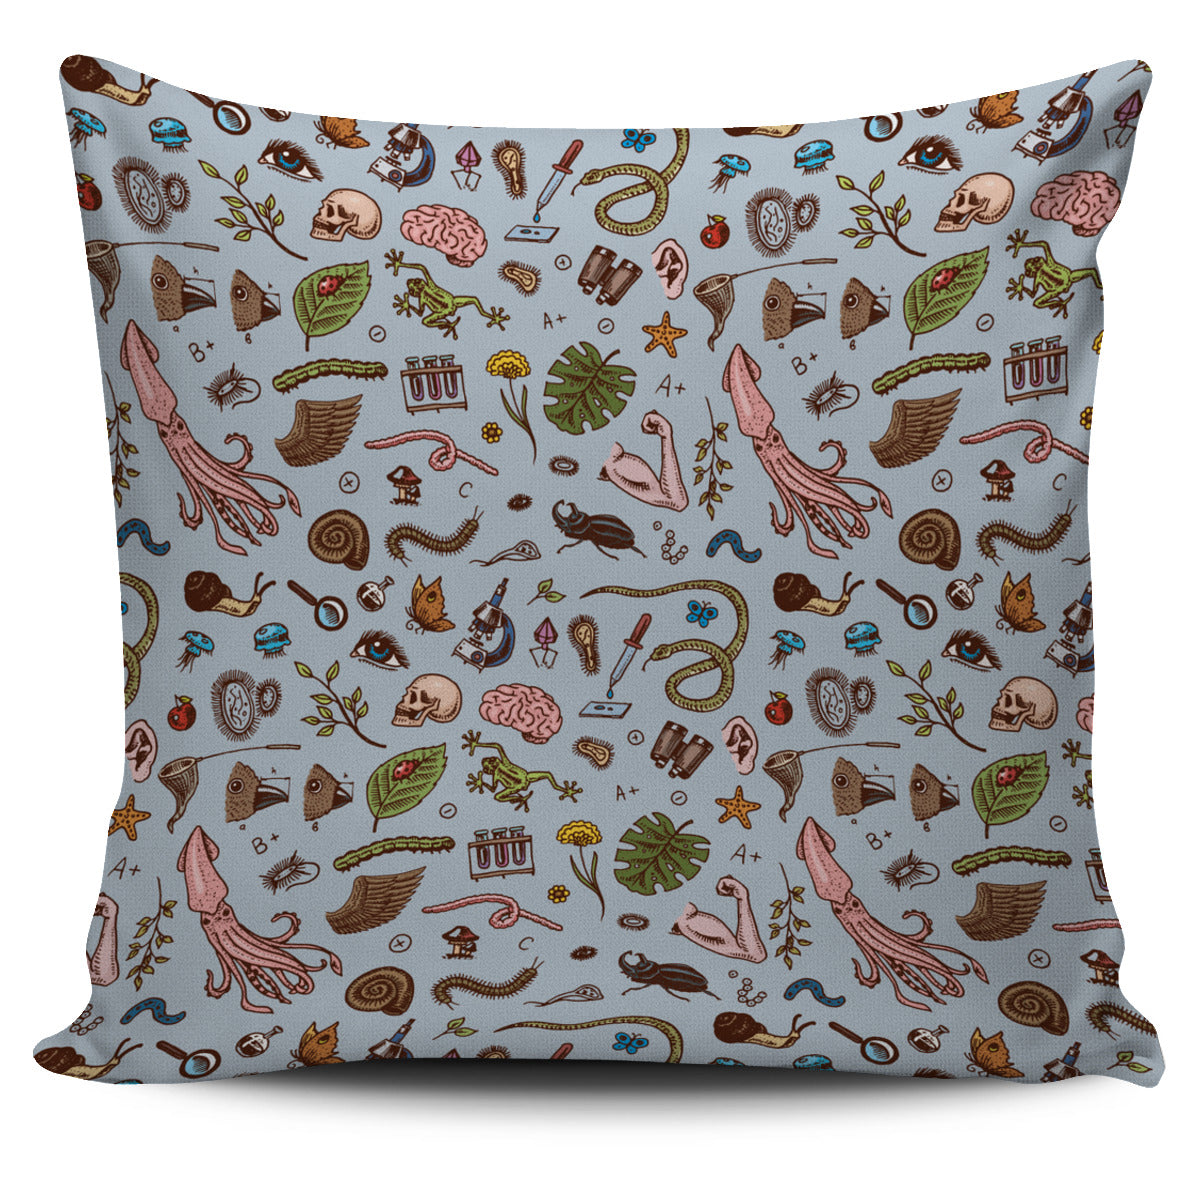 Biochemistry Research Pillow Cover